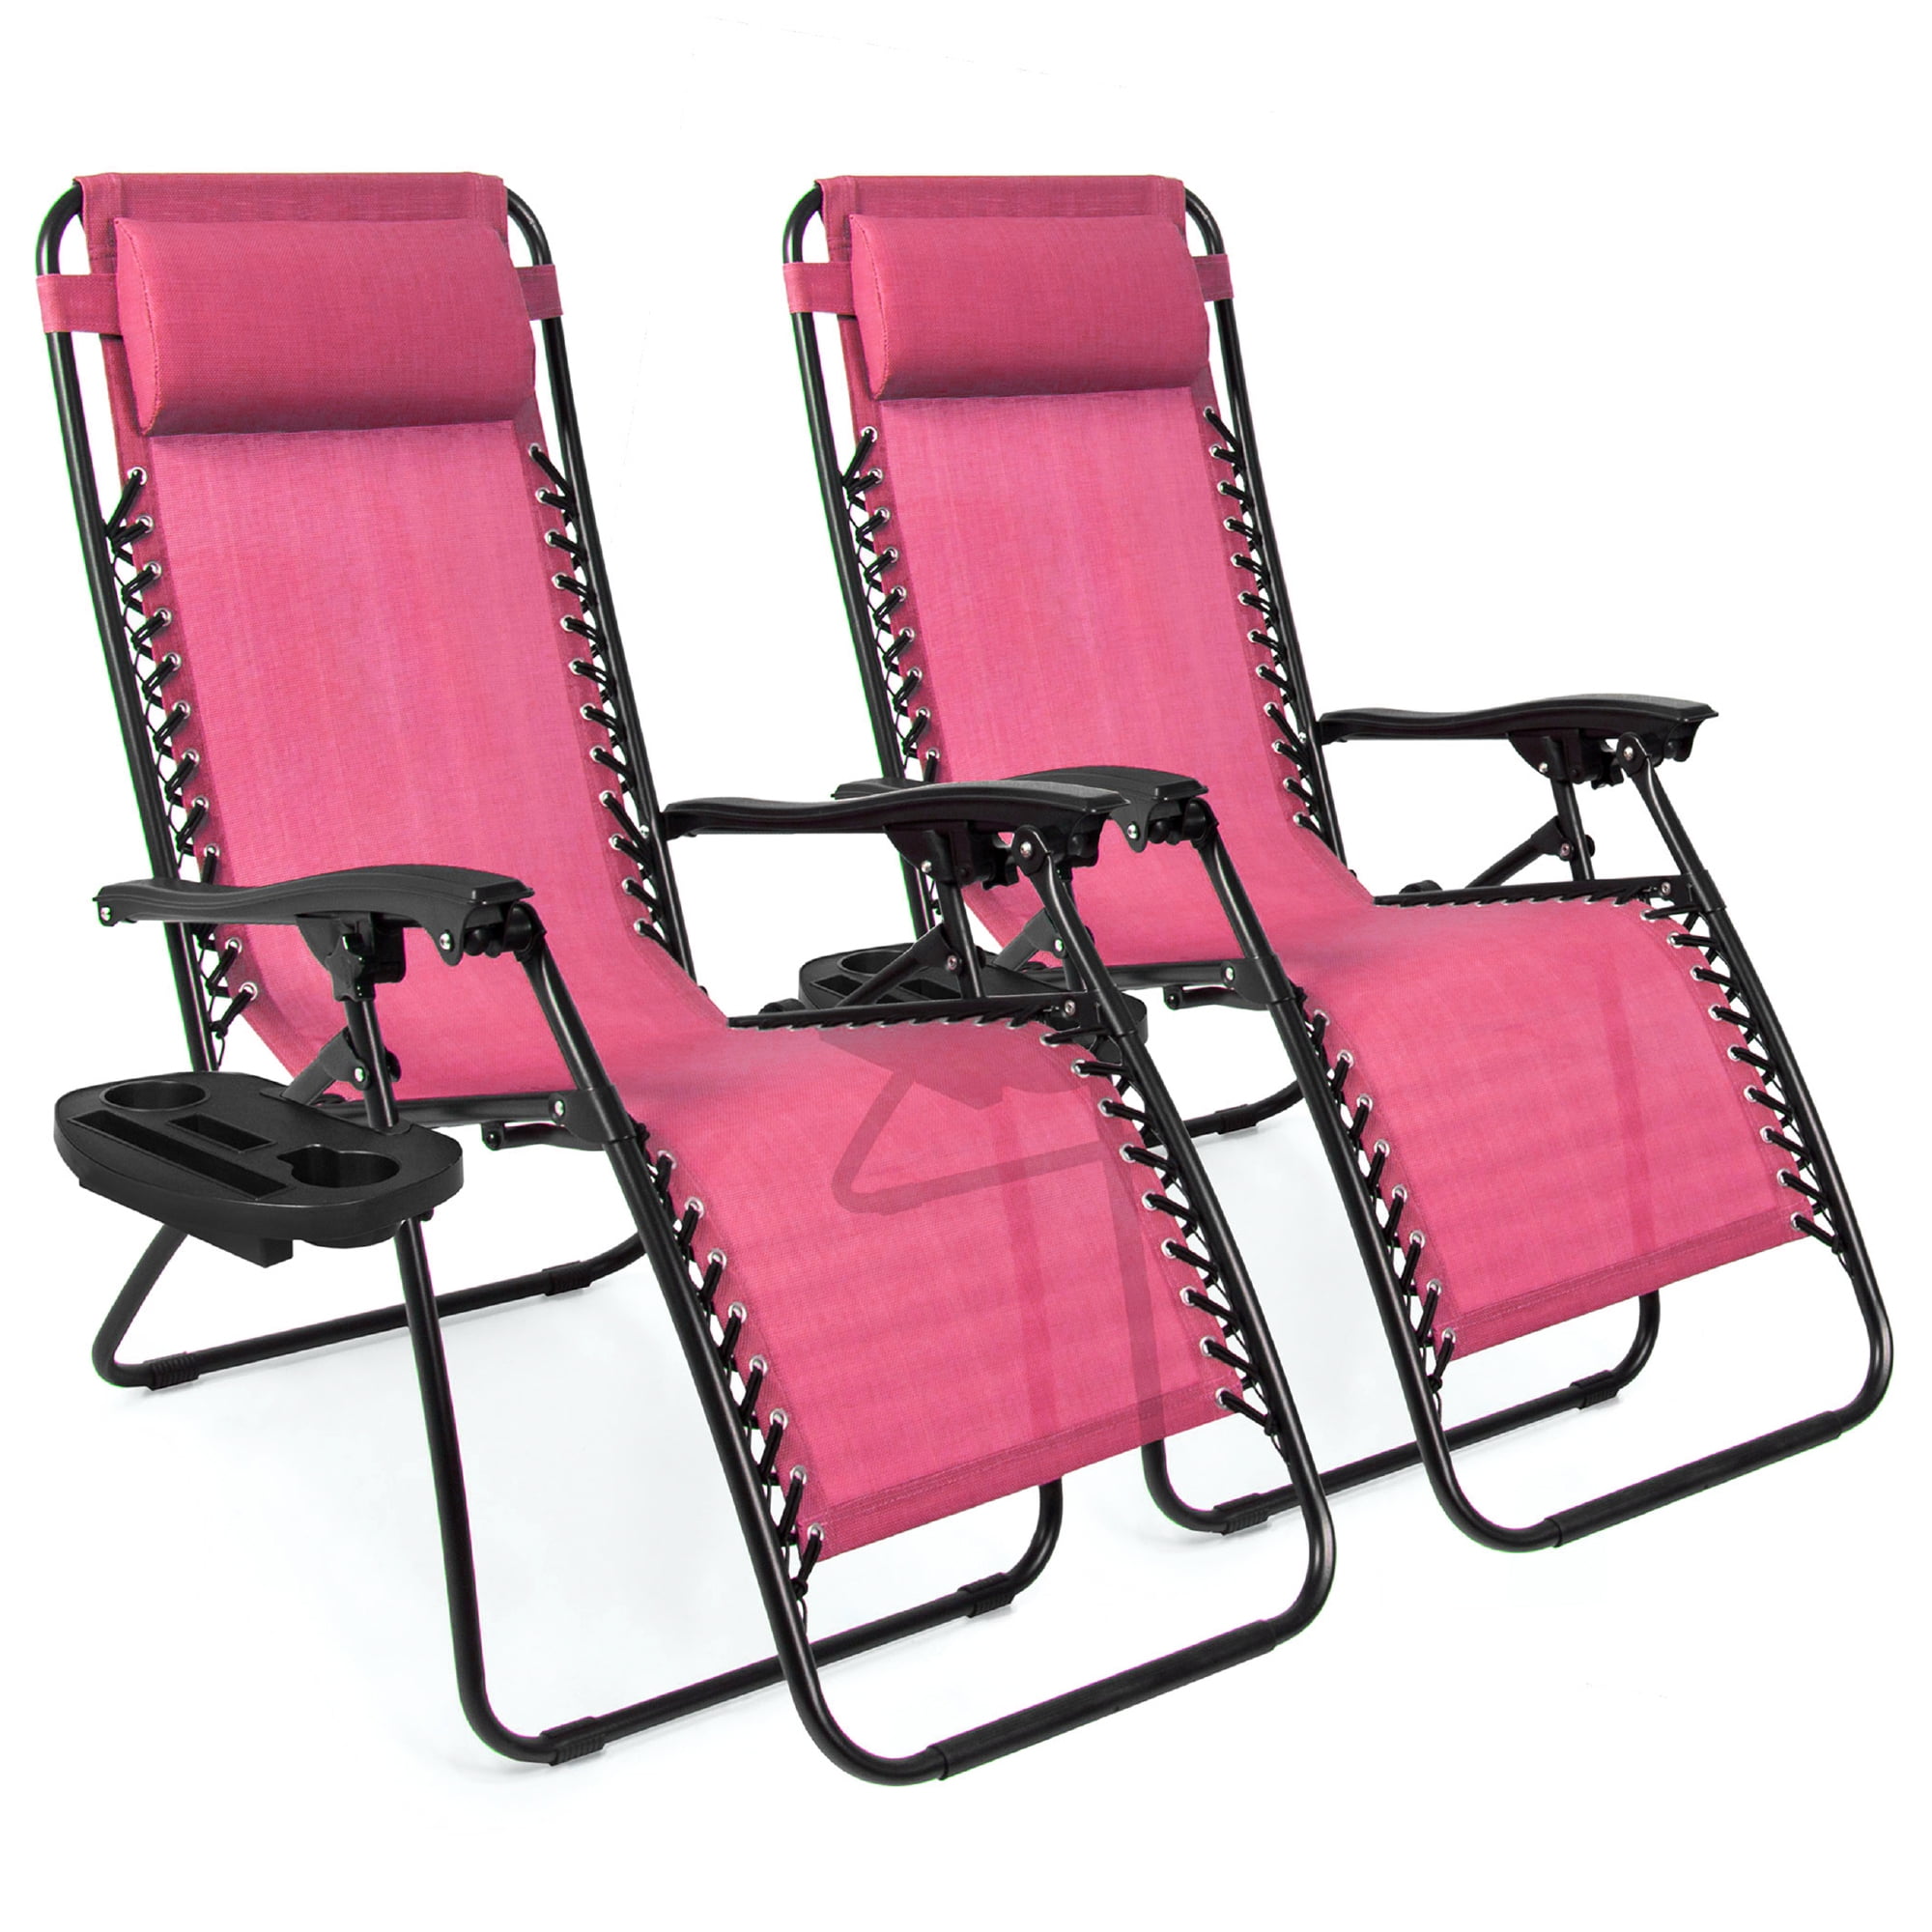 Best Choice Products Set of 2 Adjustable Zero Gravity Lounge Chair Recliners for Patio, Pool w/ Cup Holders - Pink